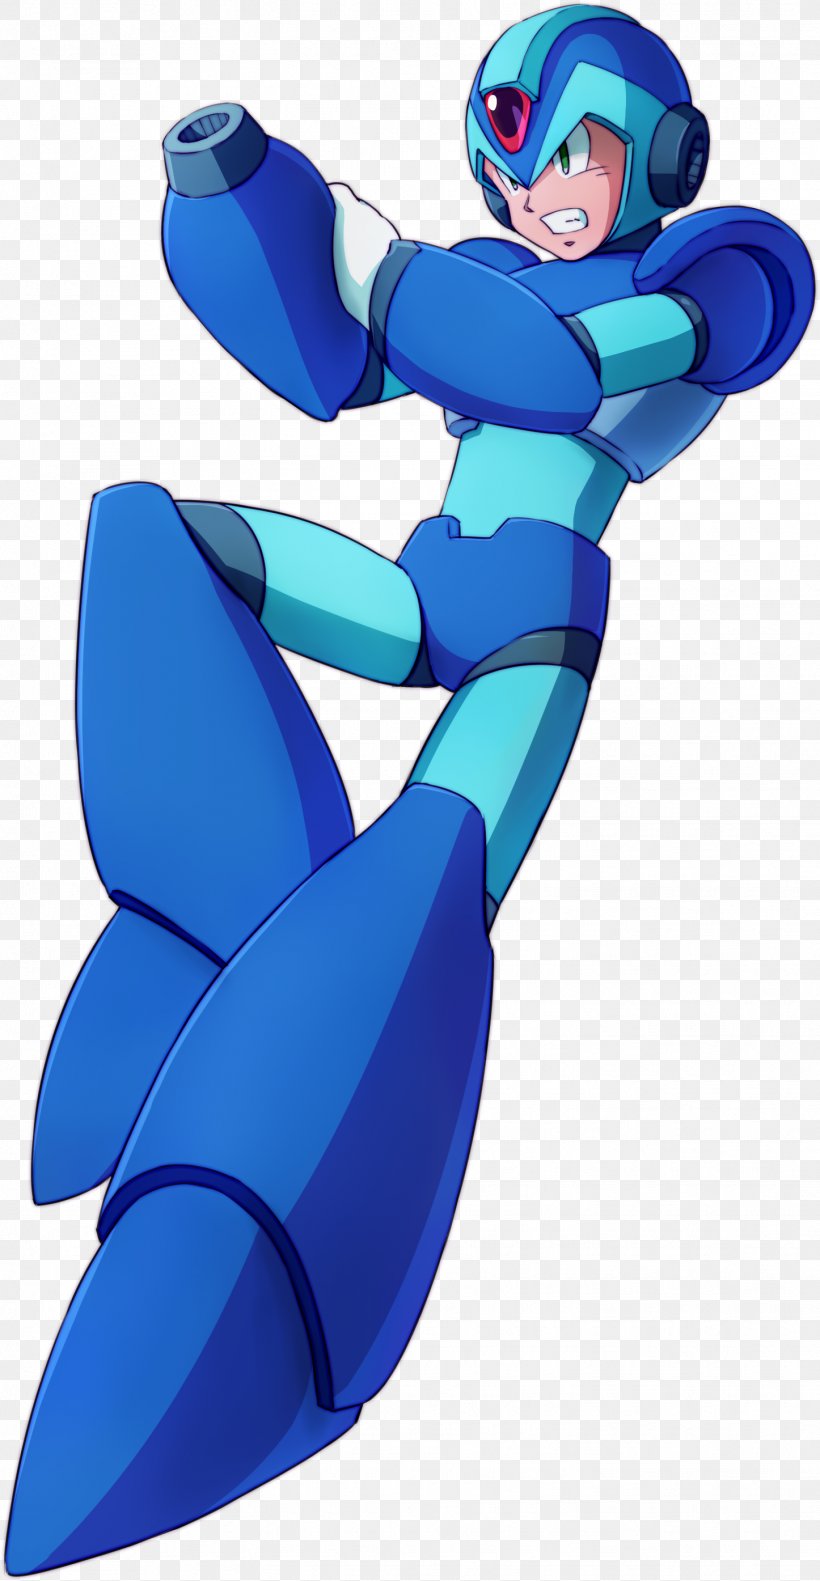 Mega Man X4 Mega Man X3 Mega Man X: Command Mission Mega Man X5, PNG, 1446x2789px, Mega Man X, Capcom, Cartoon, Cobalt Blue, Electric Blue Download Free